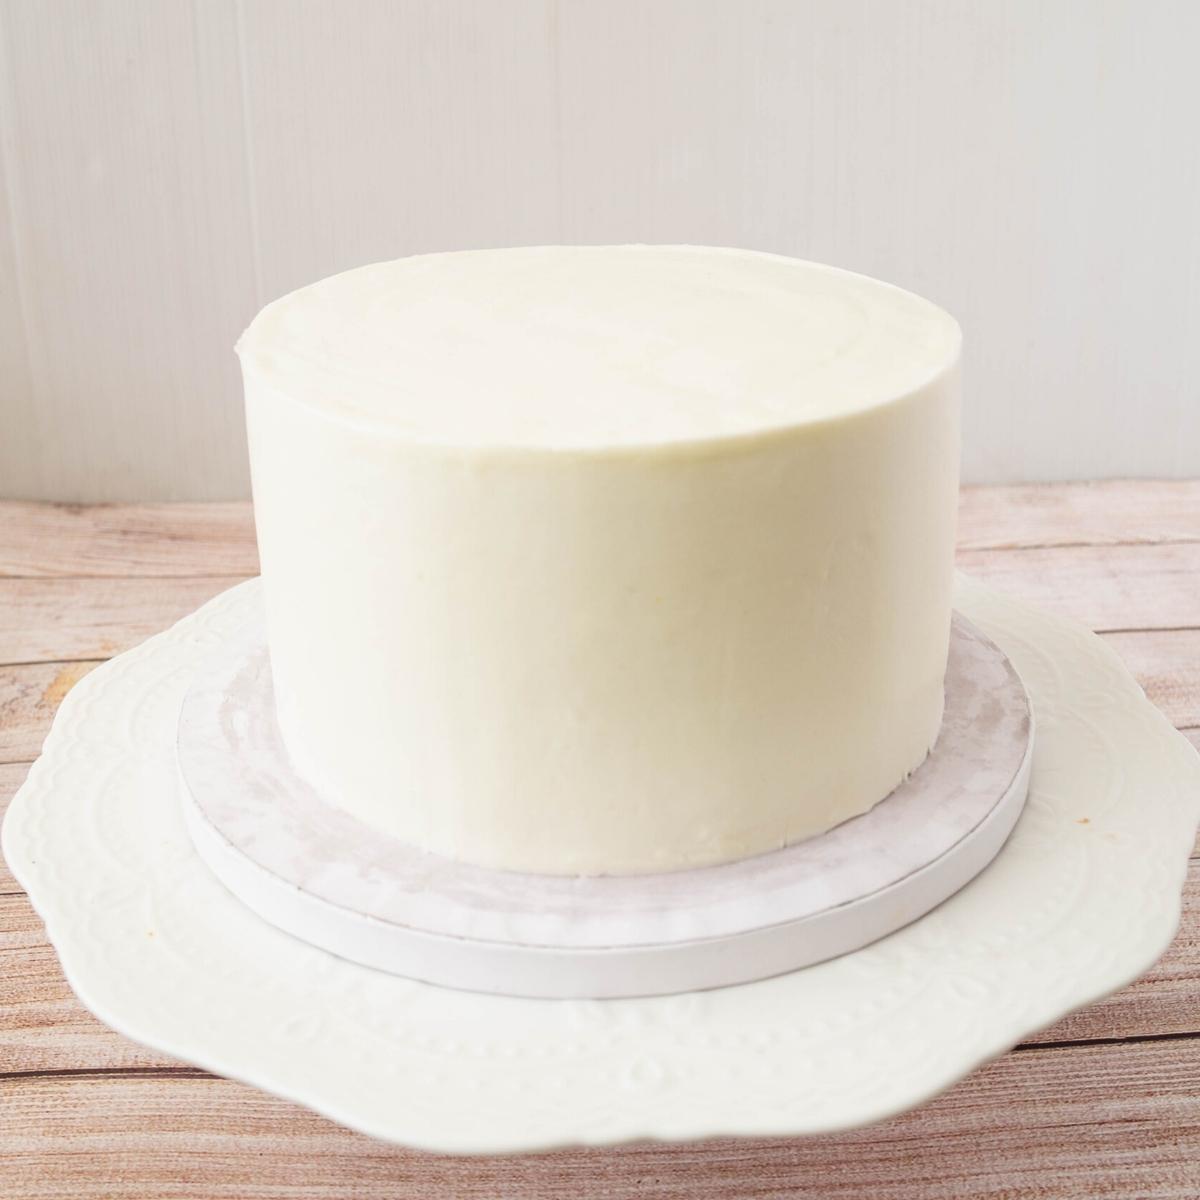 A buttercream frosted cake with sharp edges.